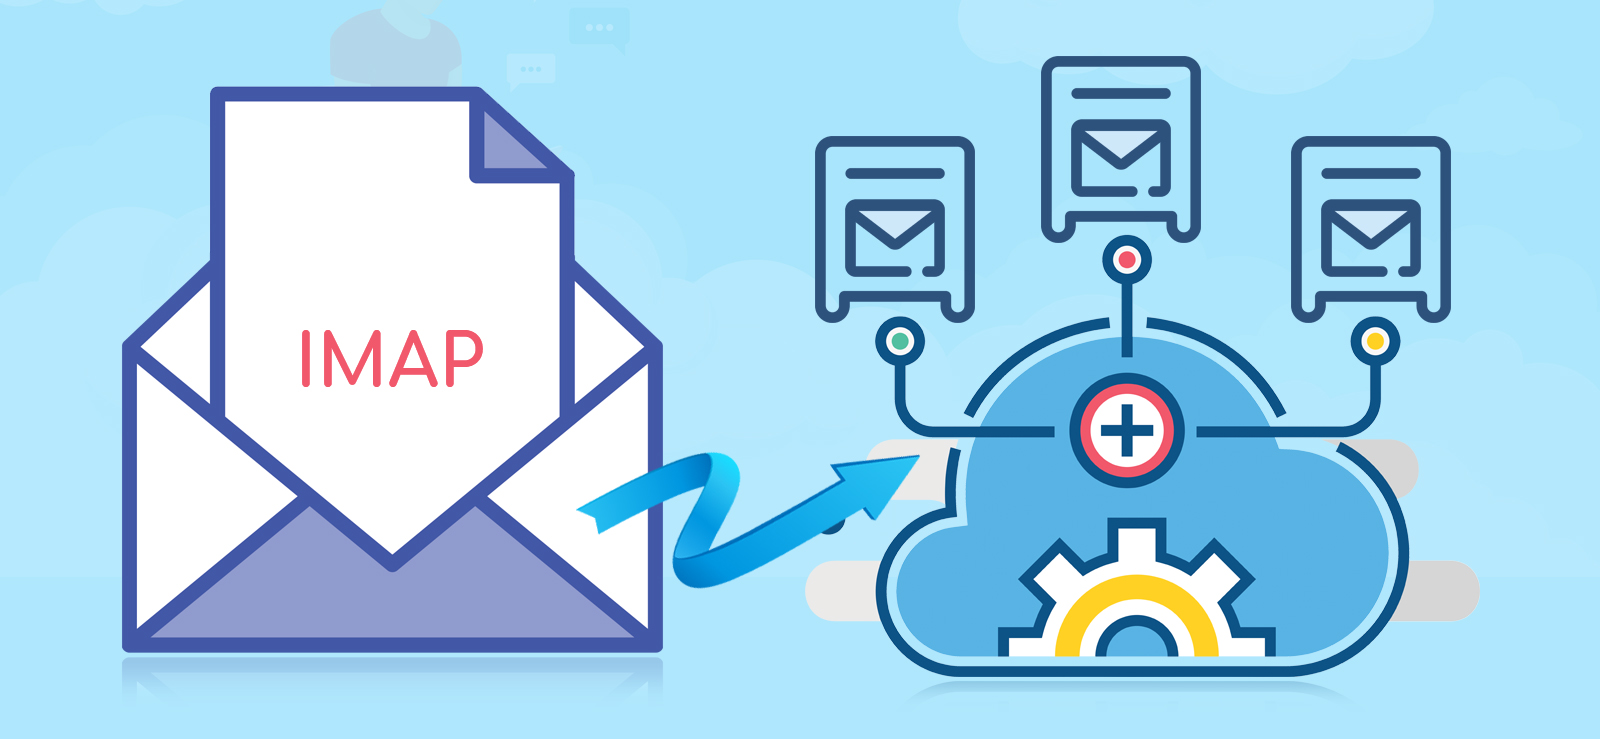 How to migrate IMAP to Office 365 Shared Mailbox?